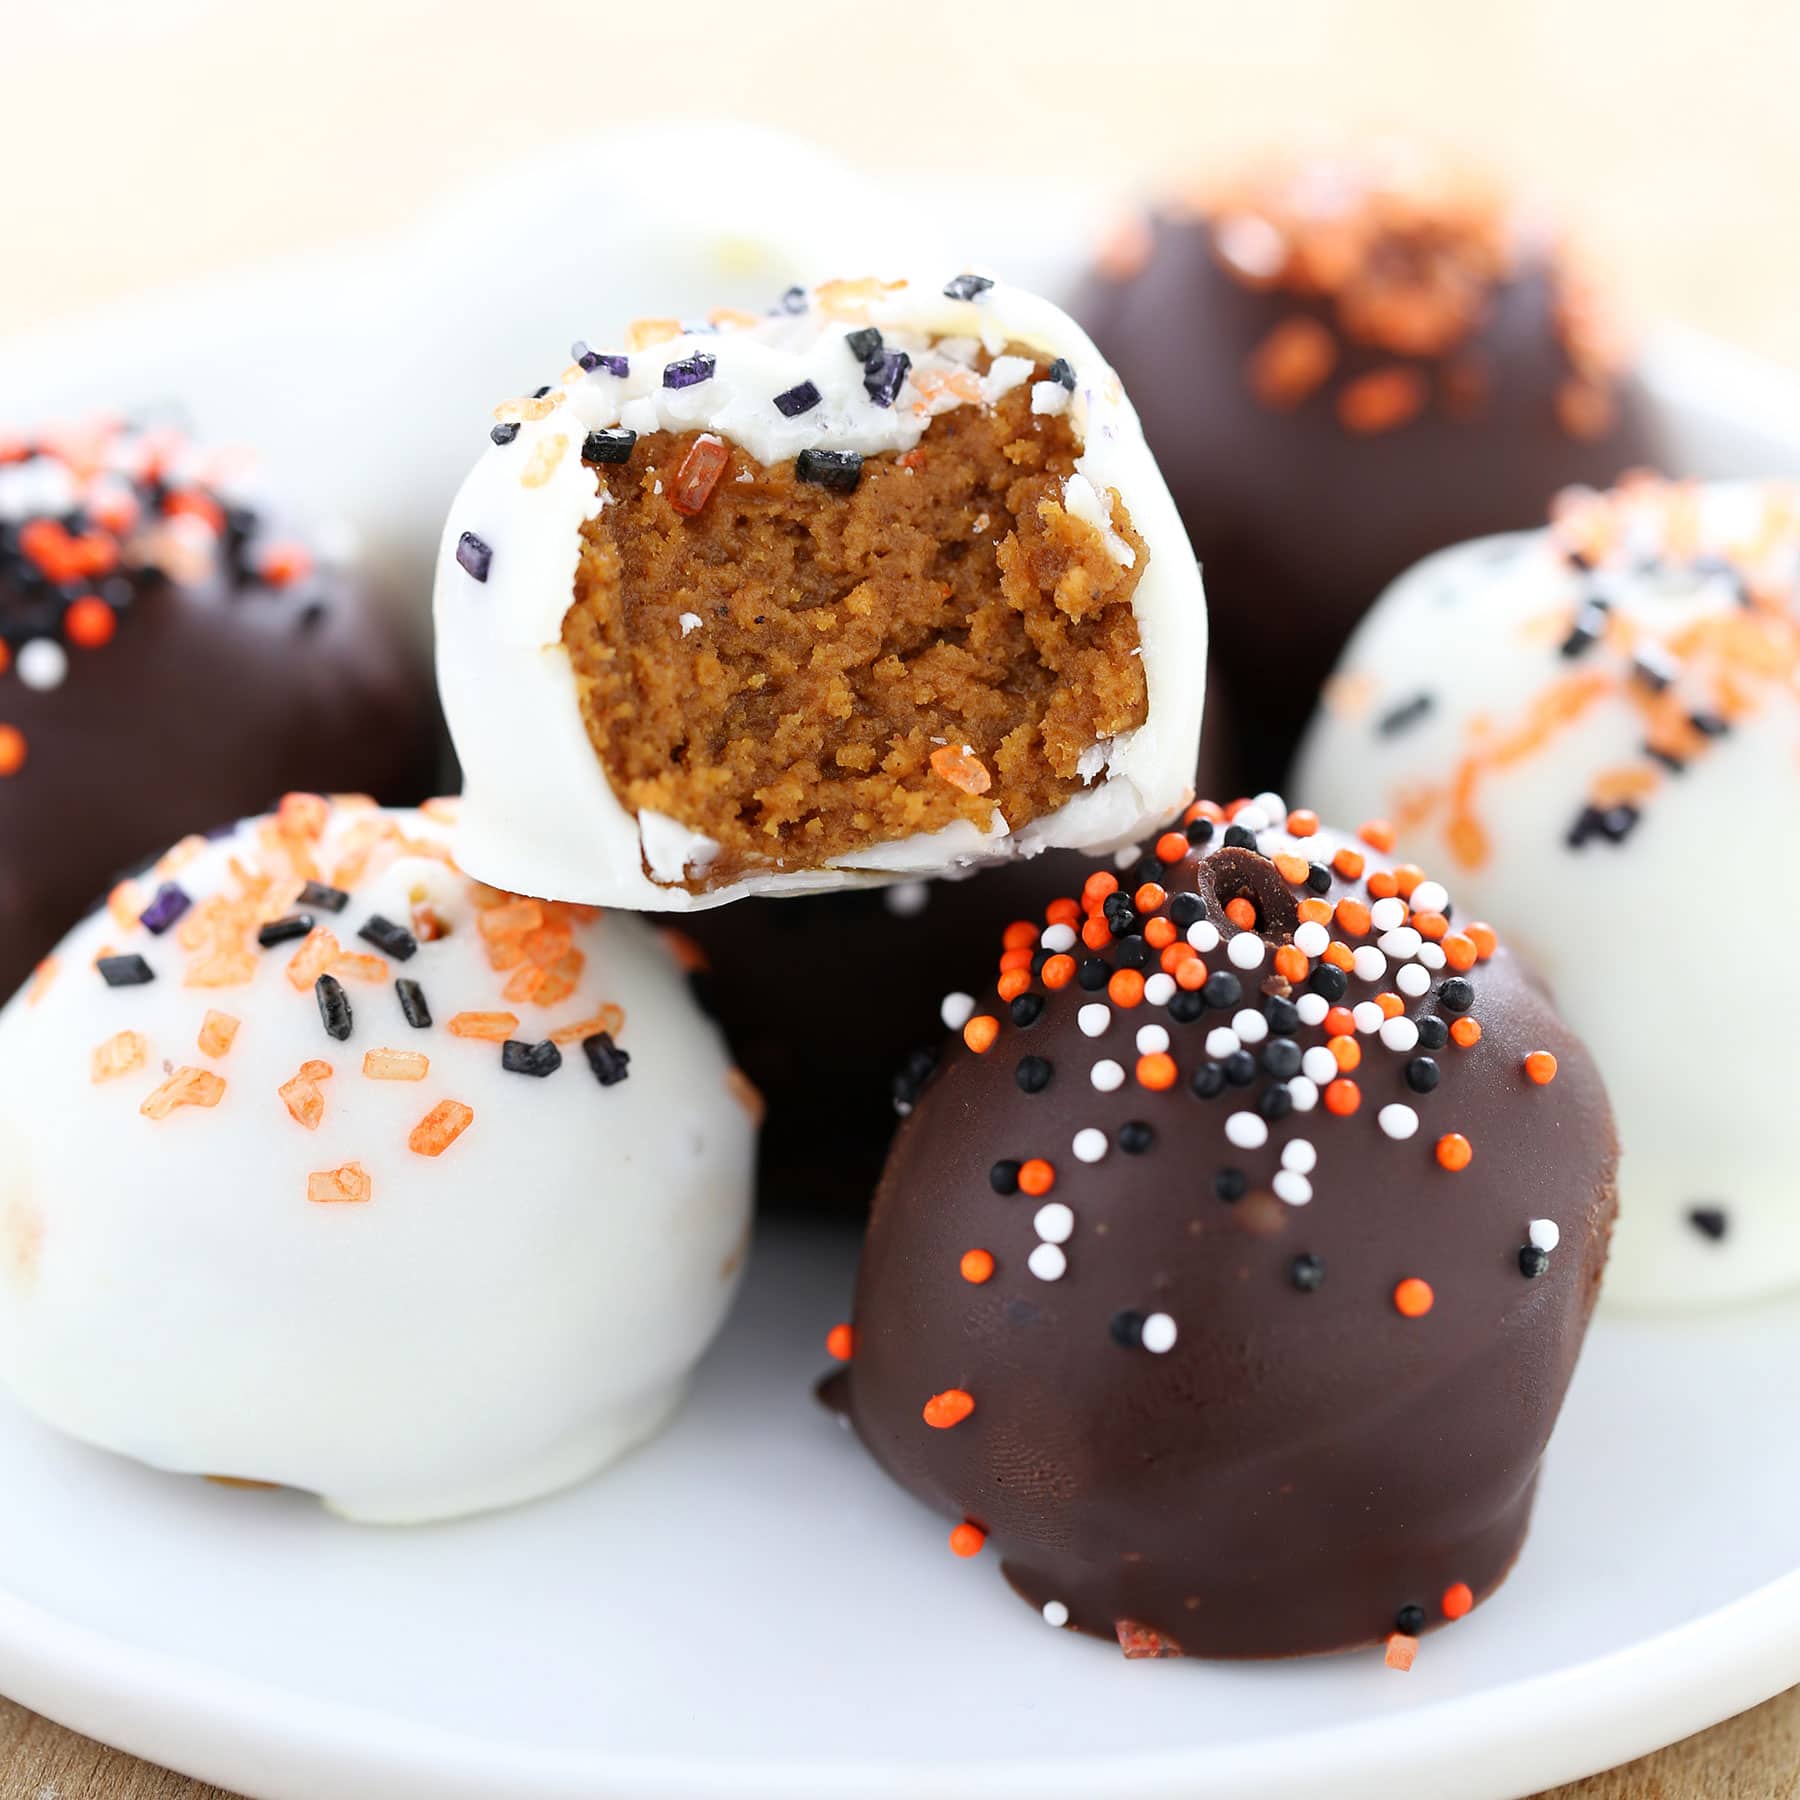 Pumpkin Cookie Butter Truffles are filled with cream cheese, pumpkin, Speculoos cookies, and tons of warm spices then dipped in chocolate. Fall perfection! No baking or chocolate tempering required!